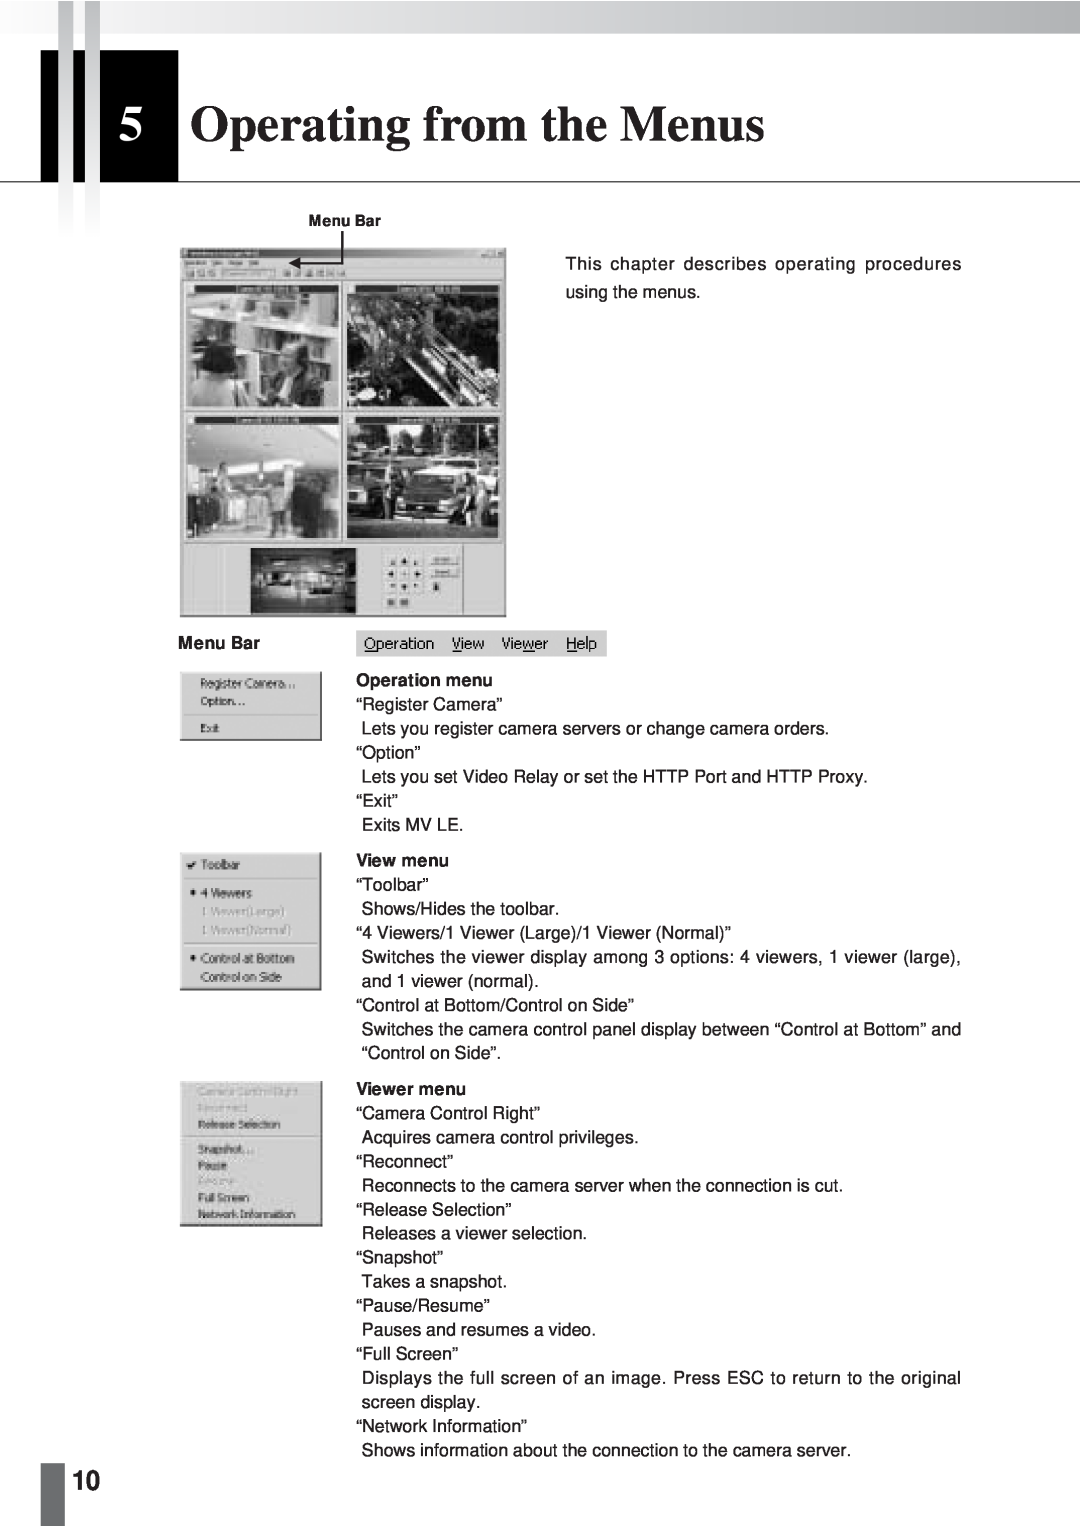 Canon 2.1 user manual 5Operating from the Menus, Menu Bar Operation menu, View menu, Viewer menu 